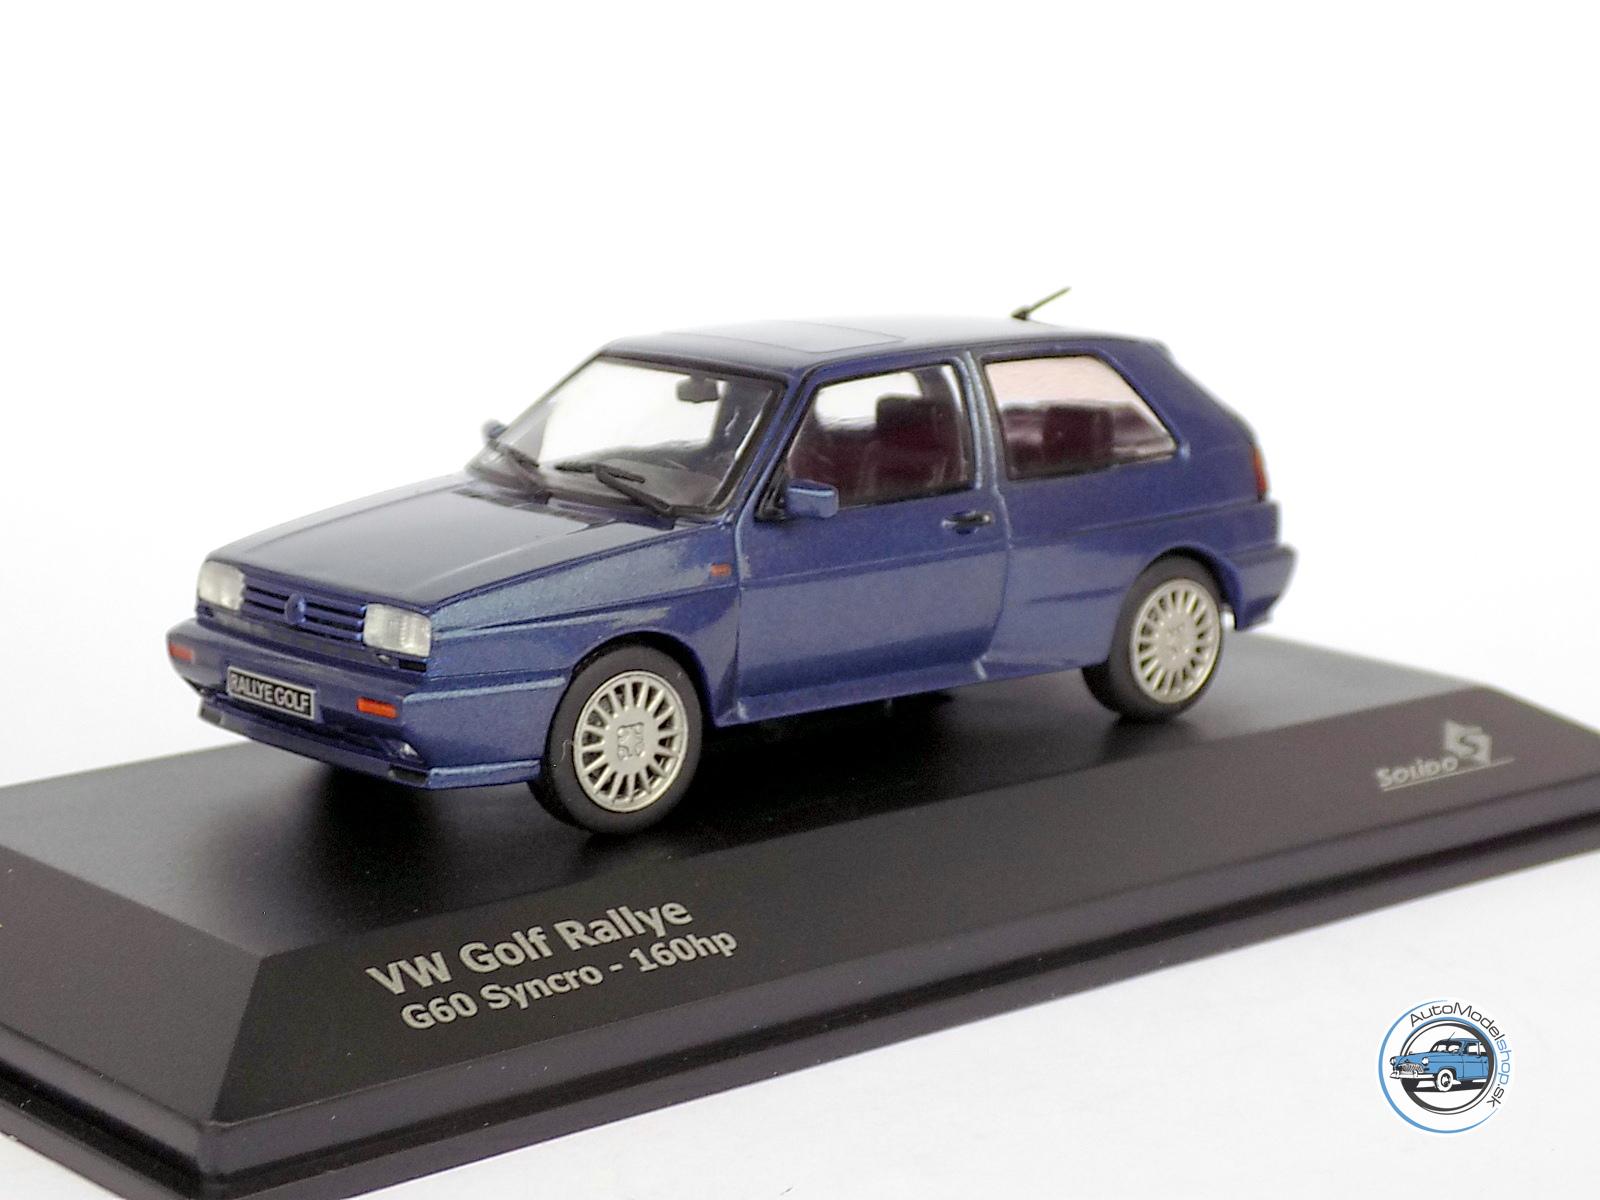  SOLIDO 1/43 - Volkswagen Golf Rally - 1989 : Clothing